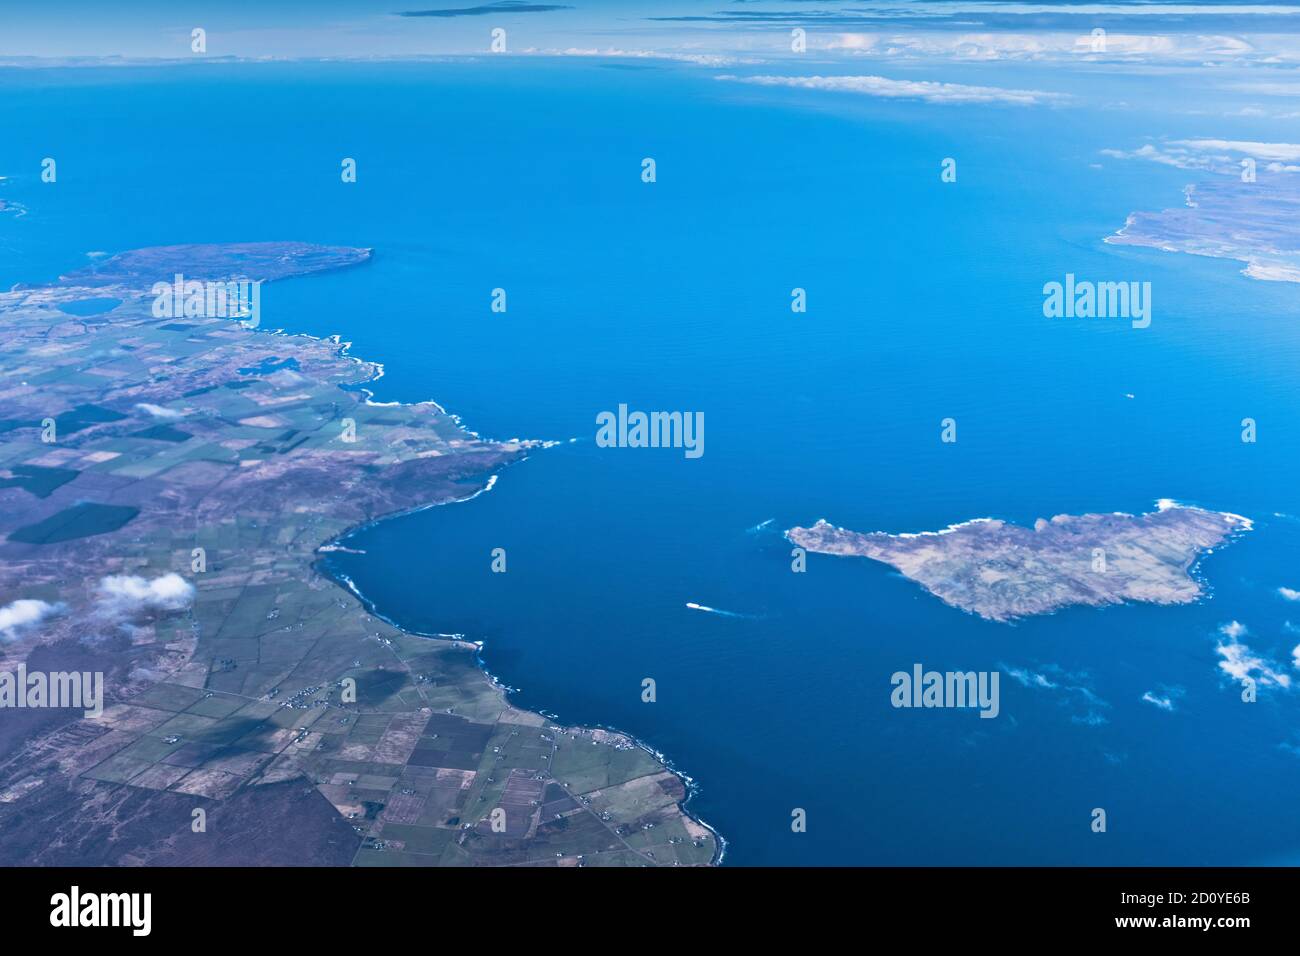 dh Scottish islands Scotland STROMA PENTLAND FIRTH Island aerial view of Caithness coast from above Stock Photo